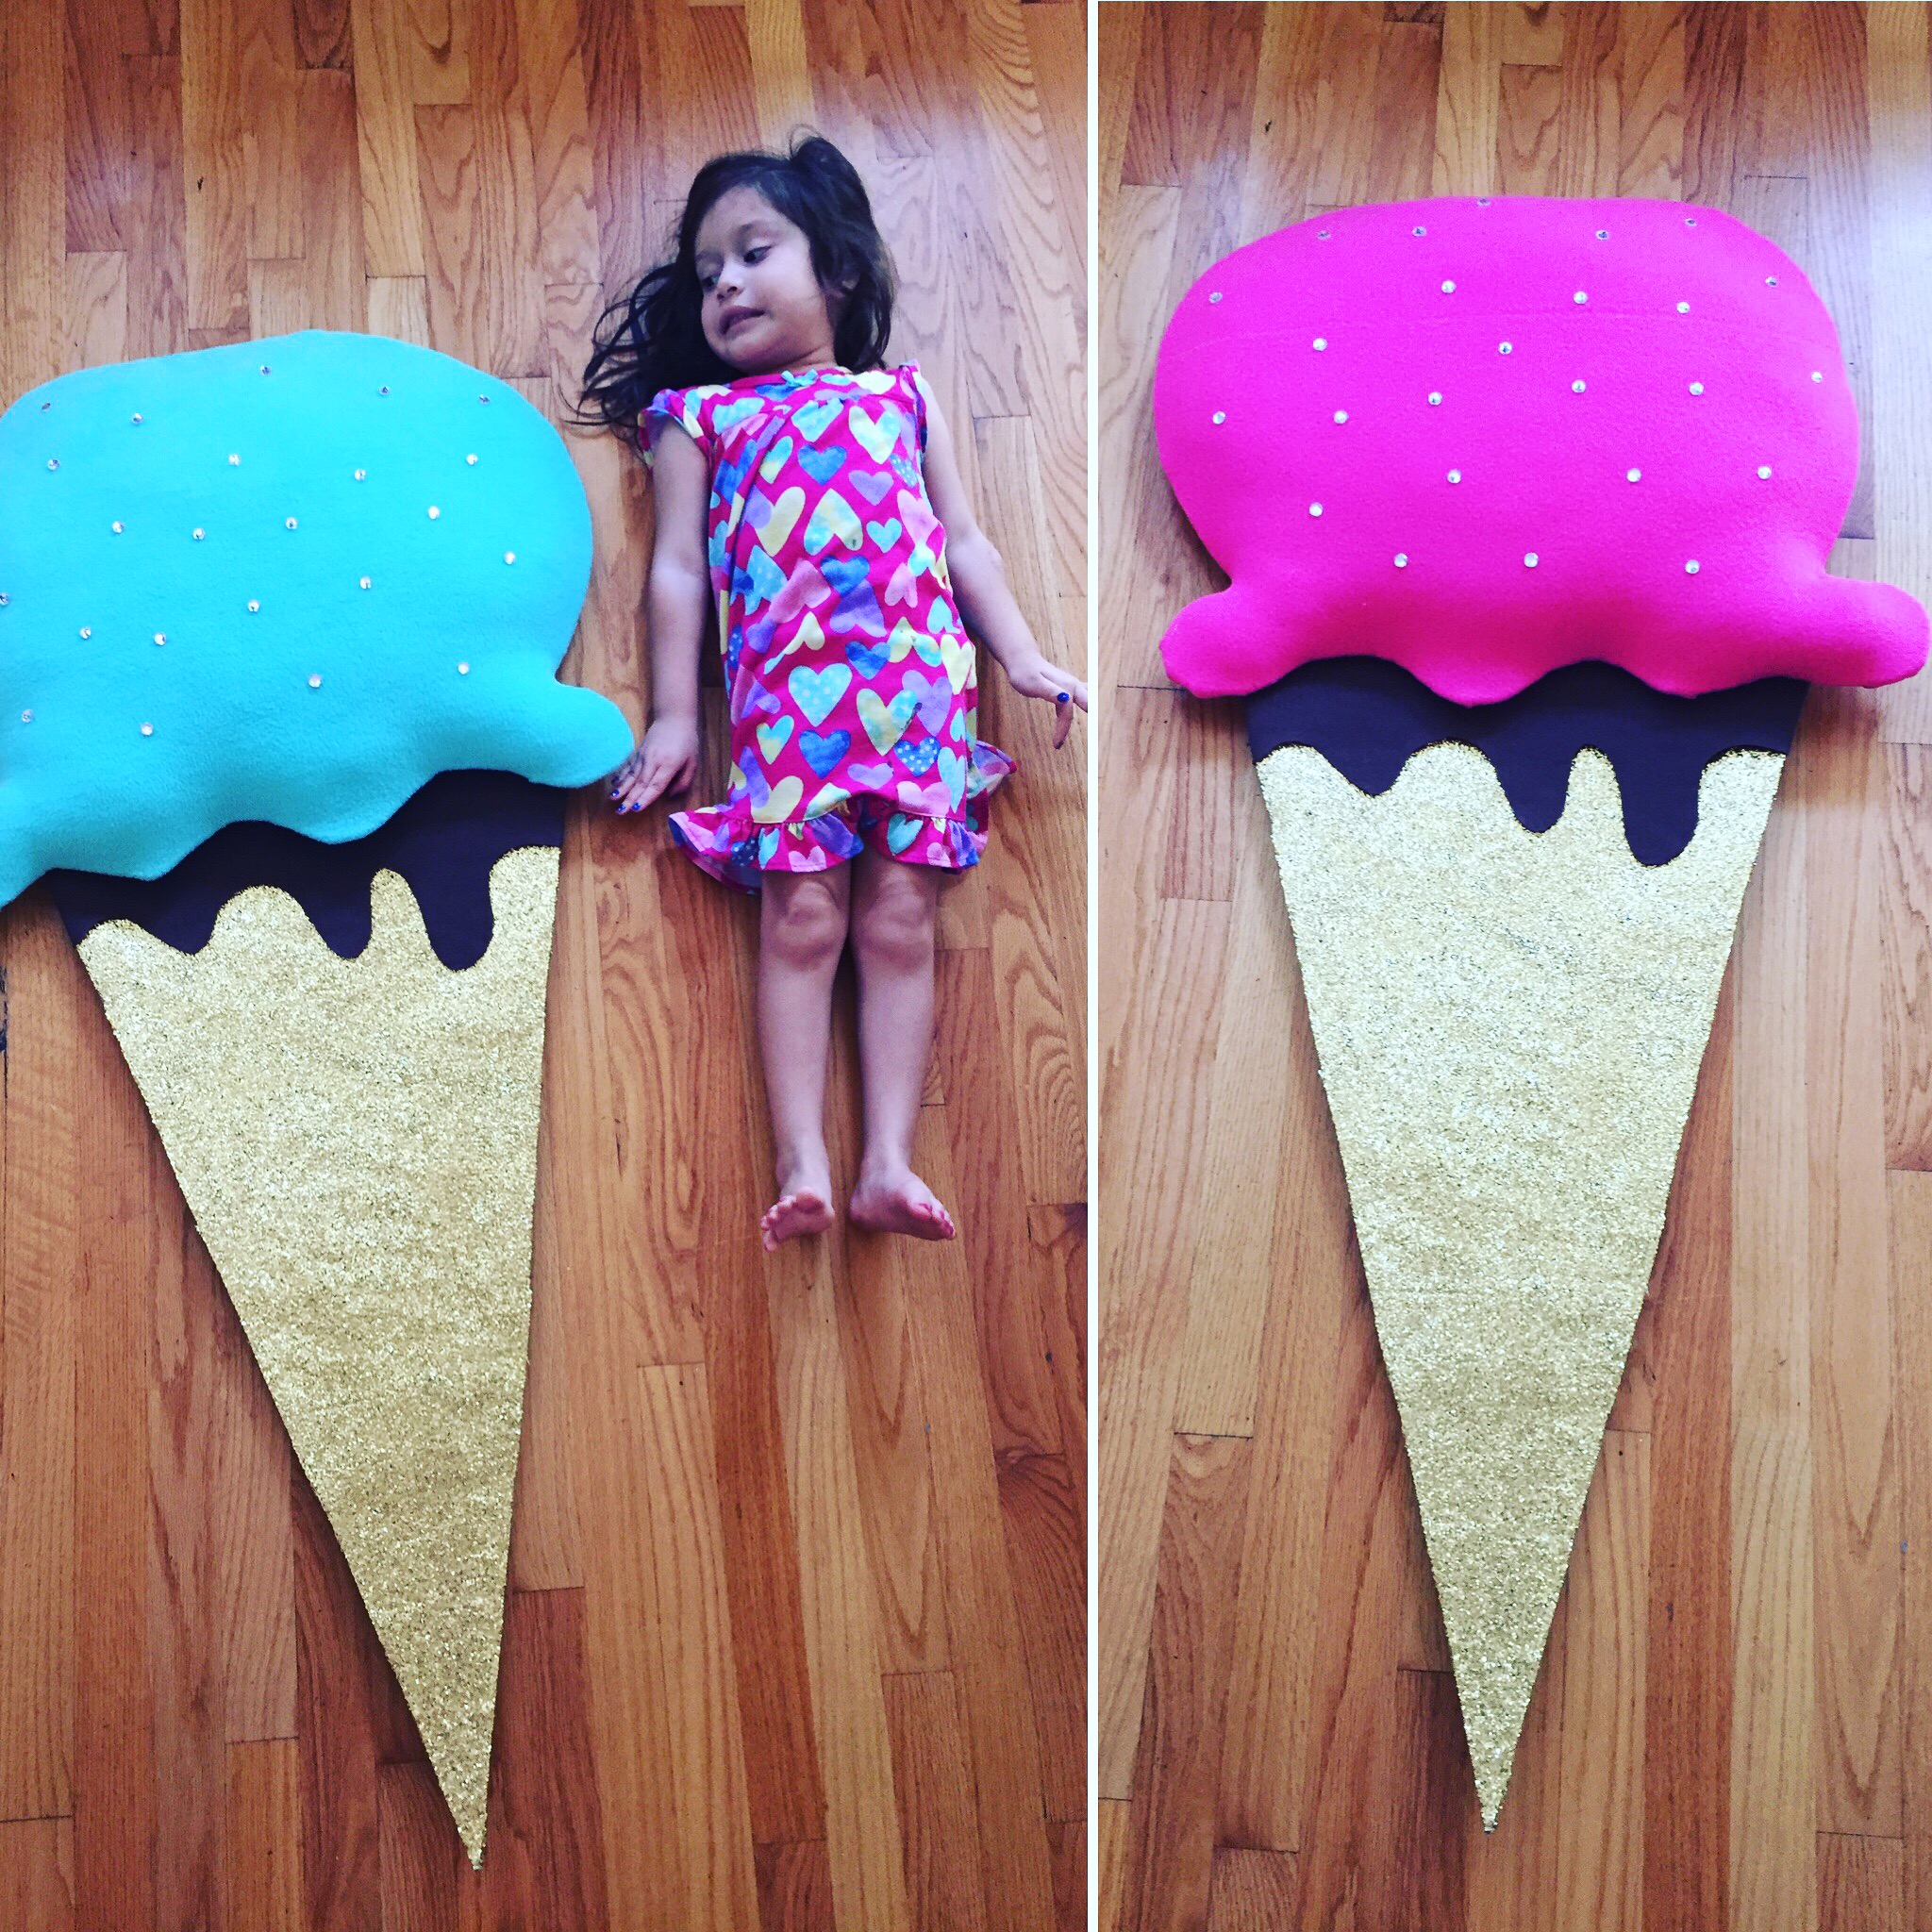 How To Make Giant Ice Cream Party Props And Decor Cathie Filian S Handmade Happy Hour